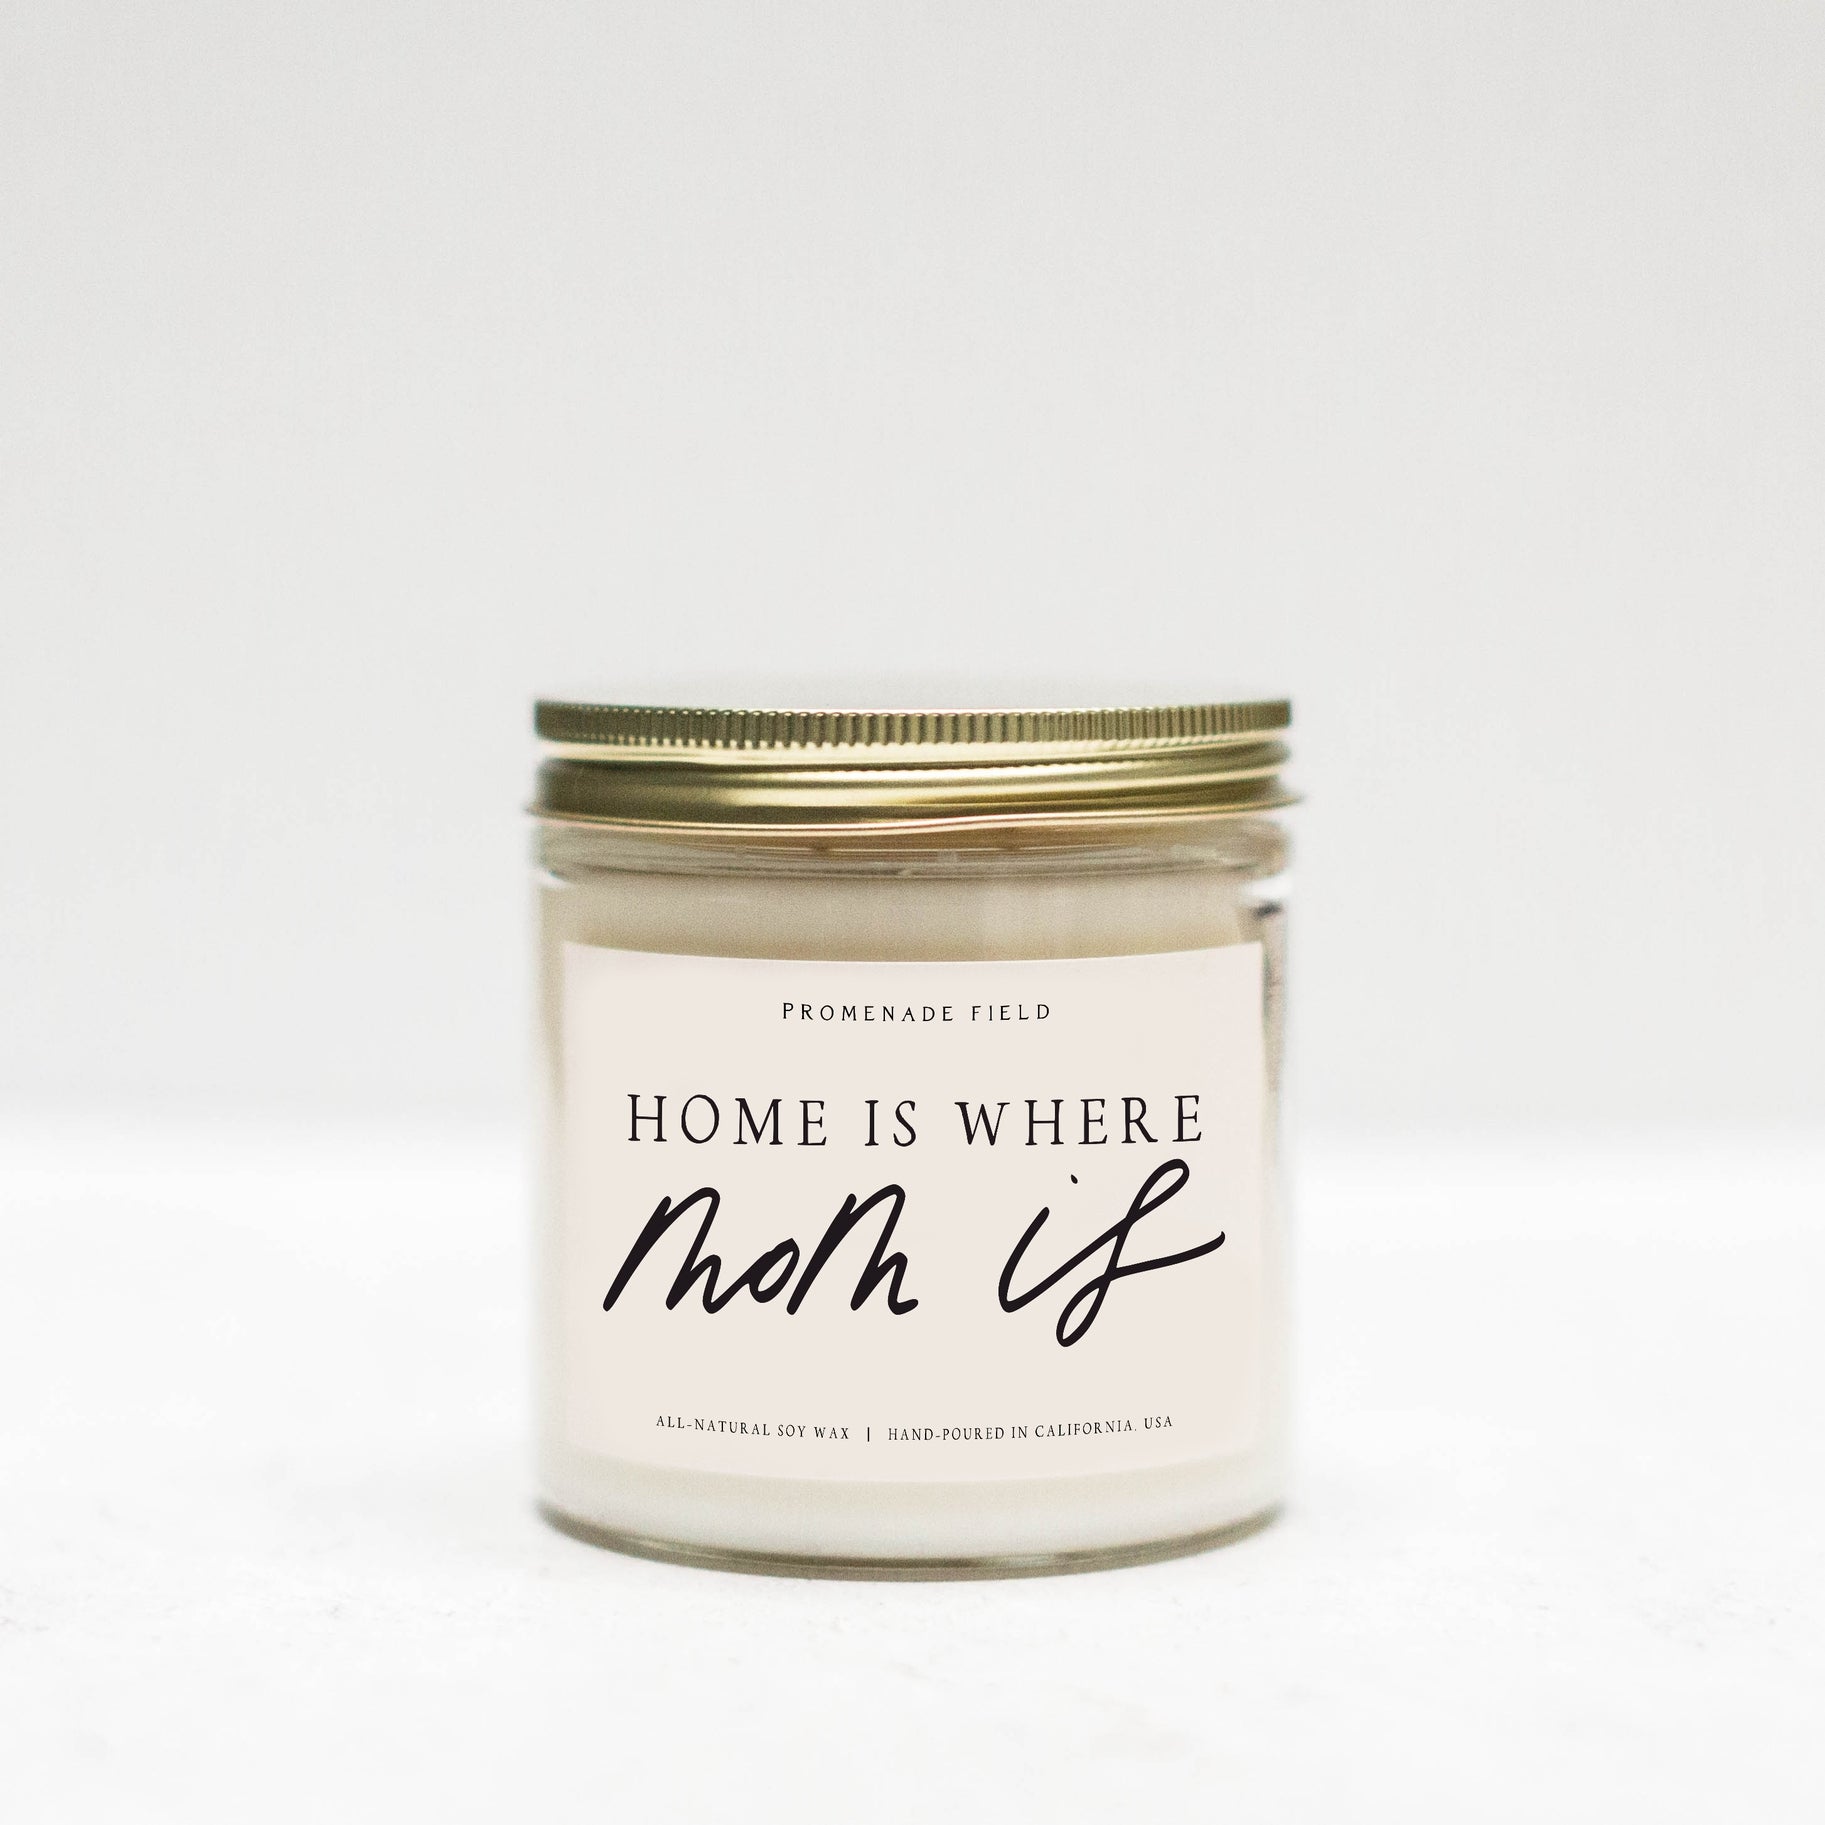 Jar candle with gold lid, white label says "Home is where Mom Is" in cursive font.